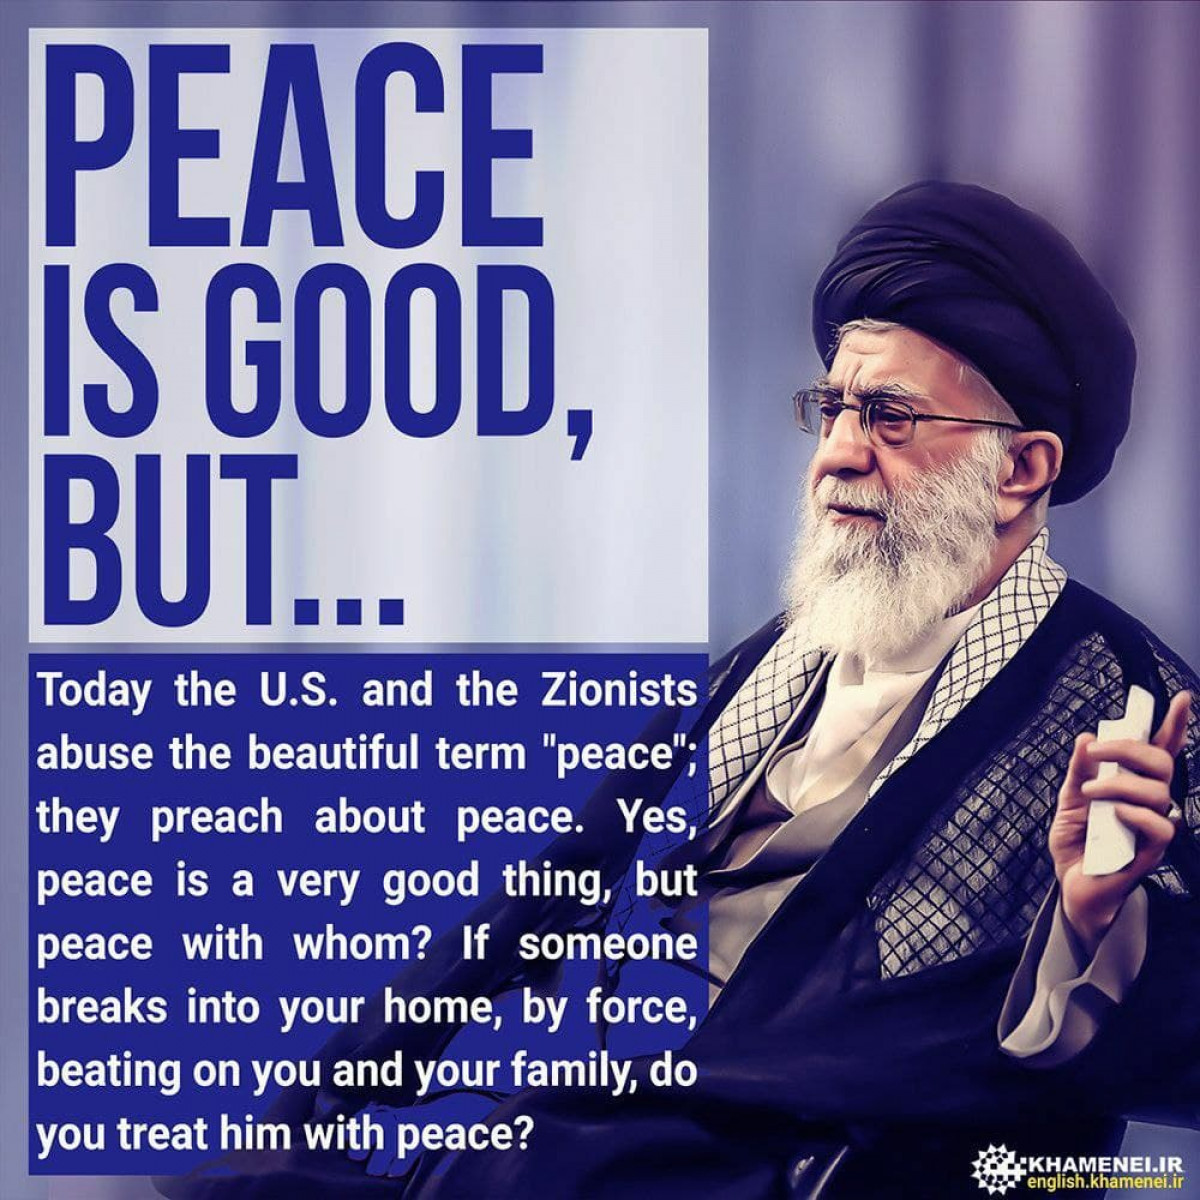 PEACE IS GOOD, BUT ..